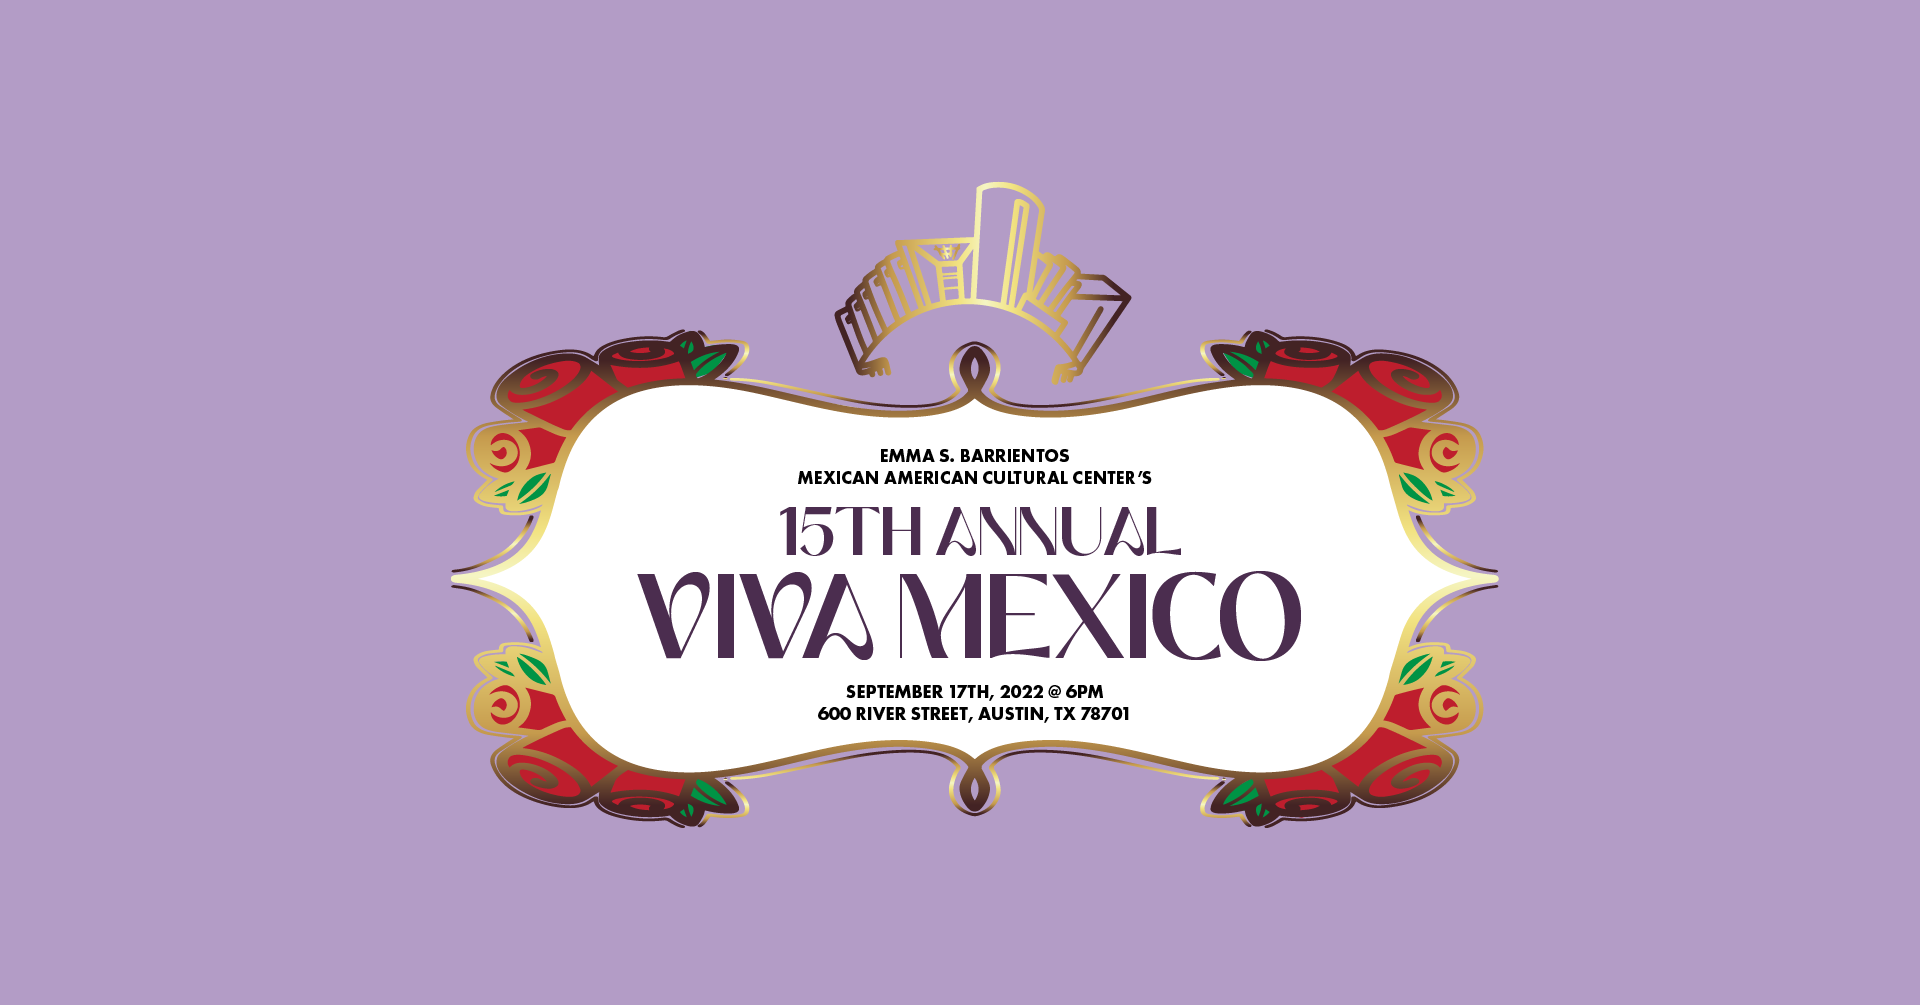 Text reads: Emma S. Barrientos Mexican American Cultural Center's 15th Annual Viva Mexico September 17th, 2022 at 6PM 600 River Street, Austin, TX 78701